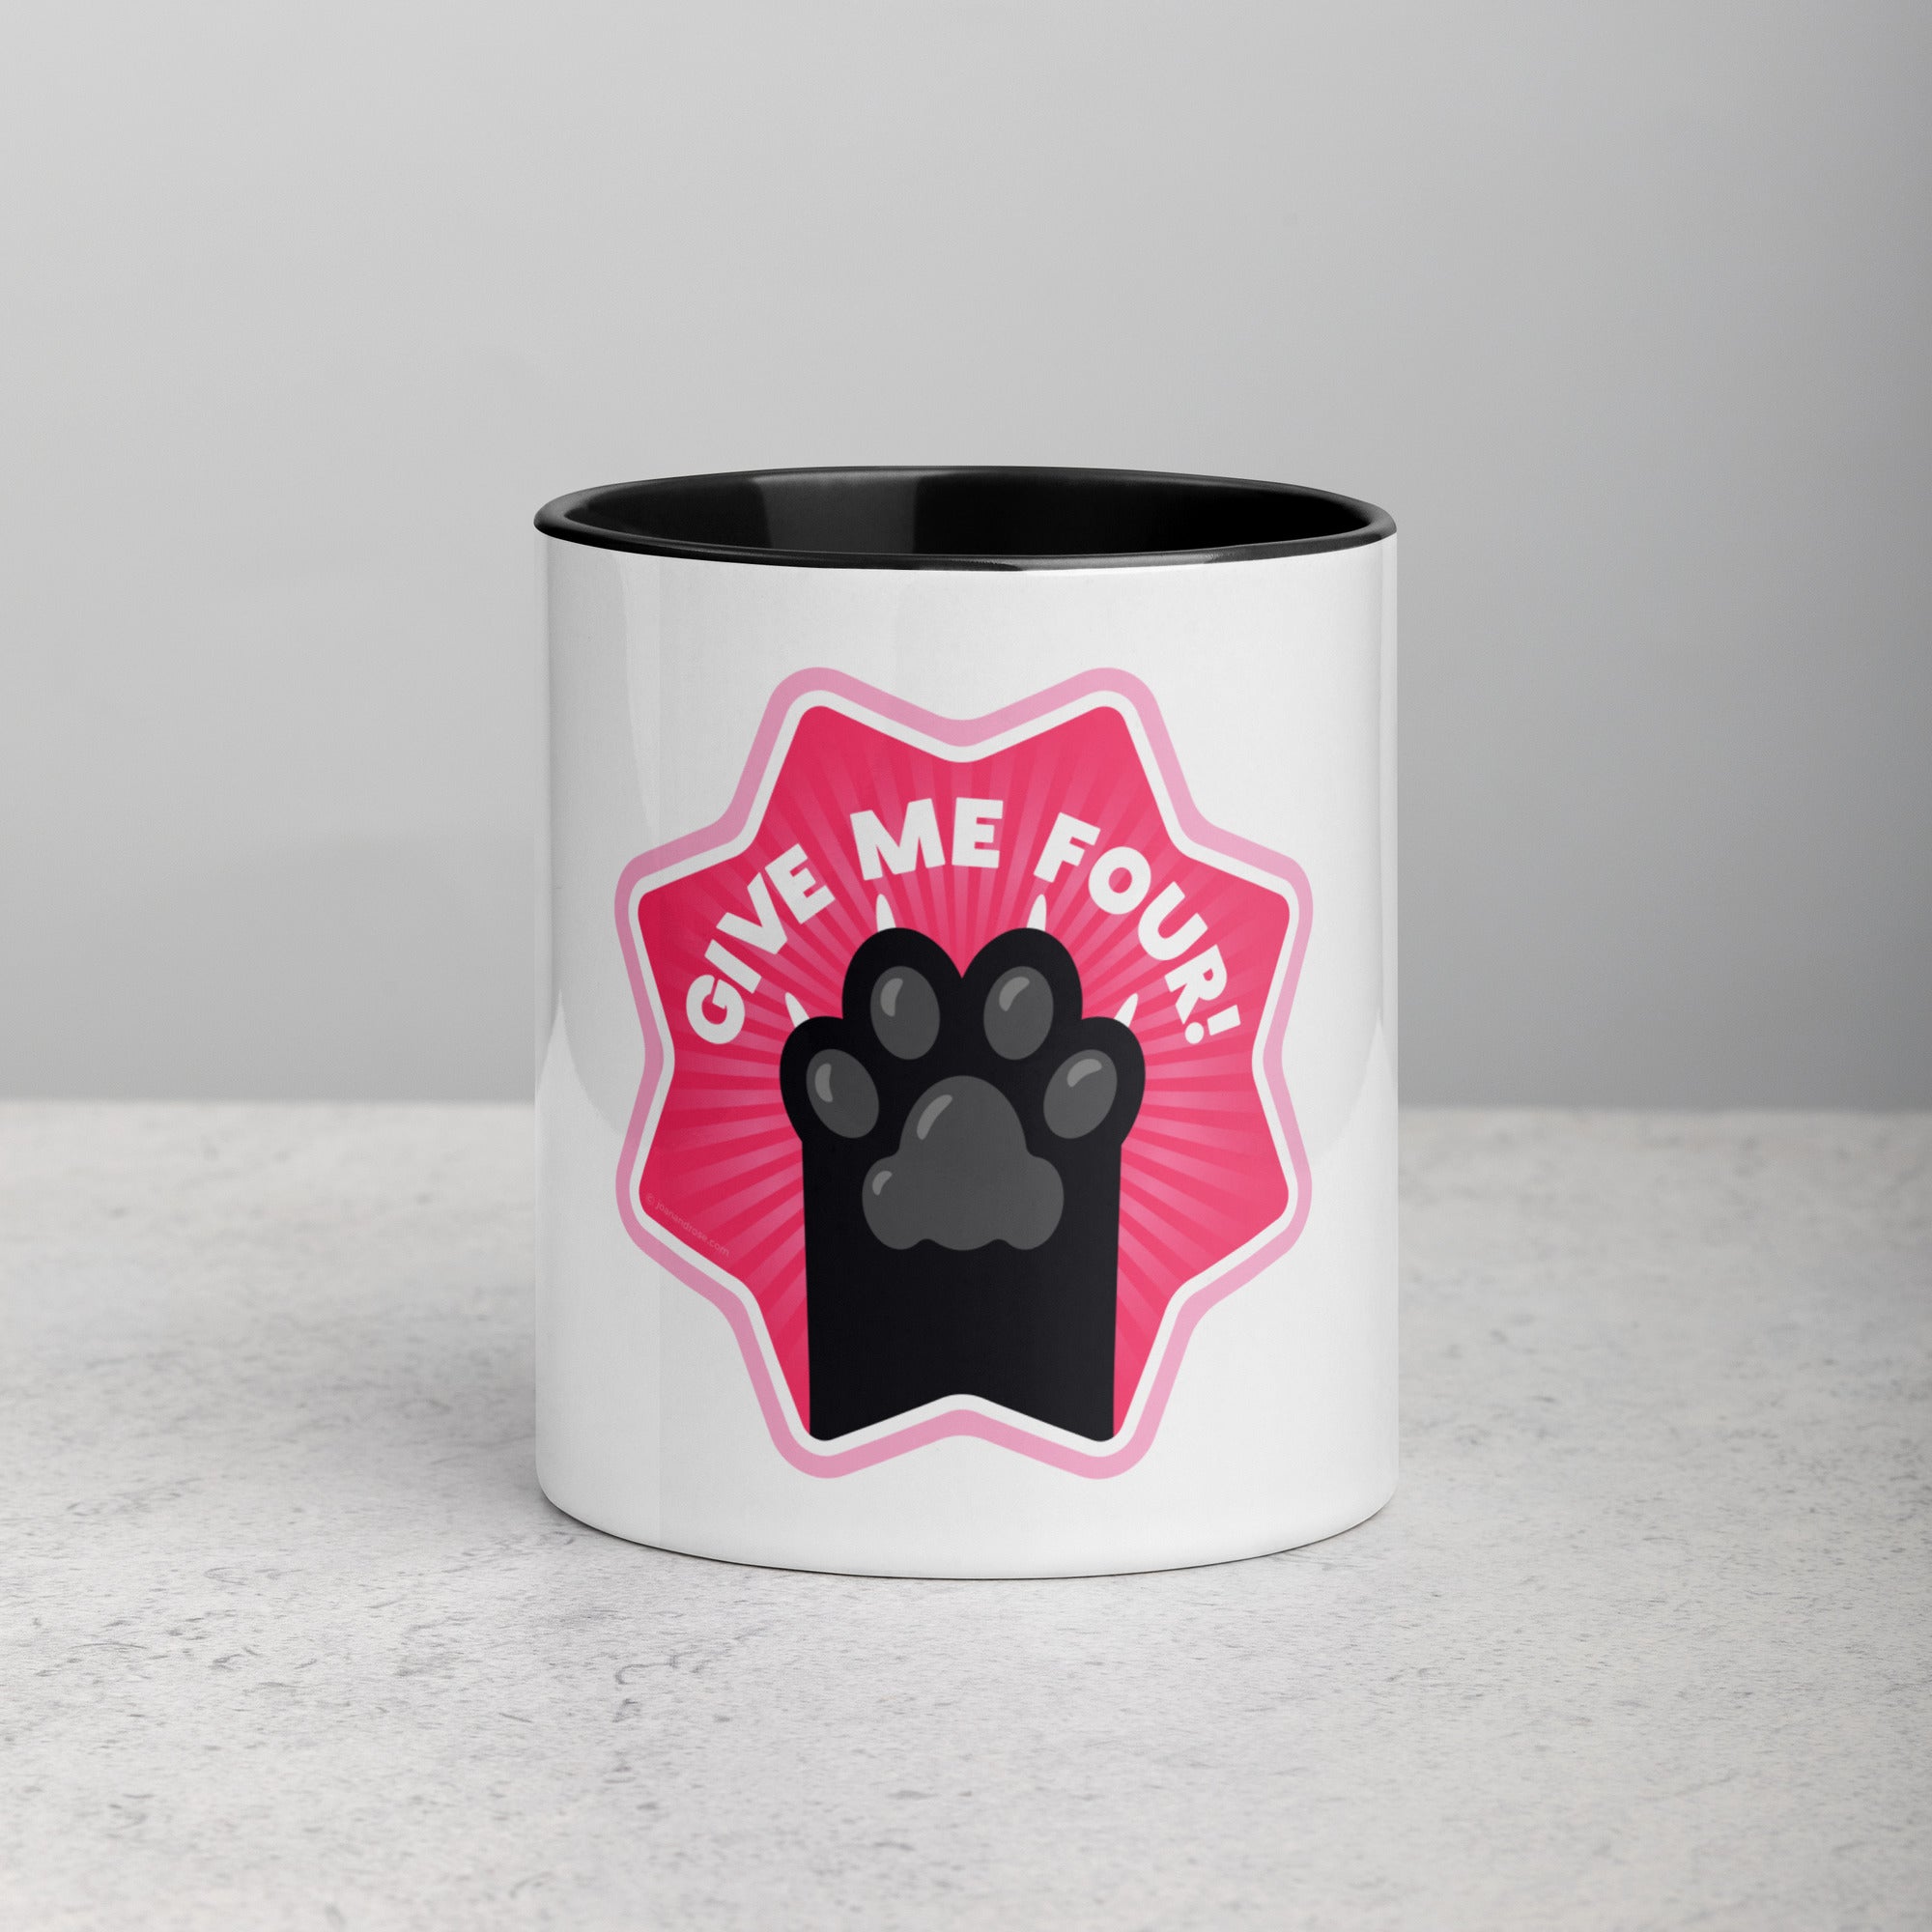 front facing image of a white mug with black interior and handle. Mug has image of a black cats paw on a pink 8 sided star with the text 'give me four'